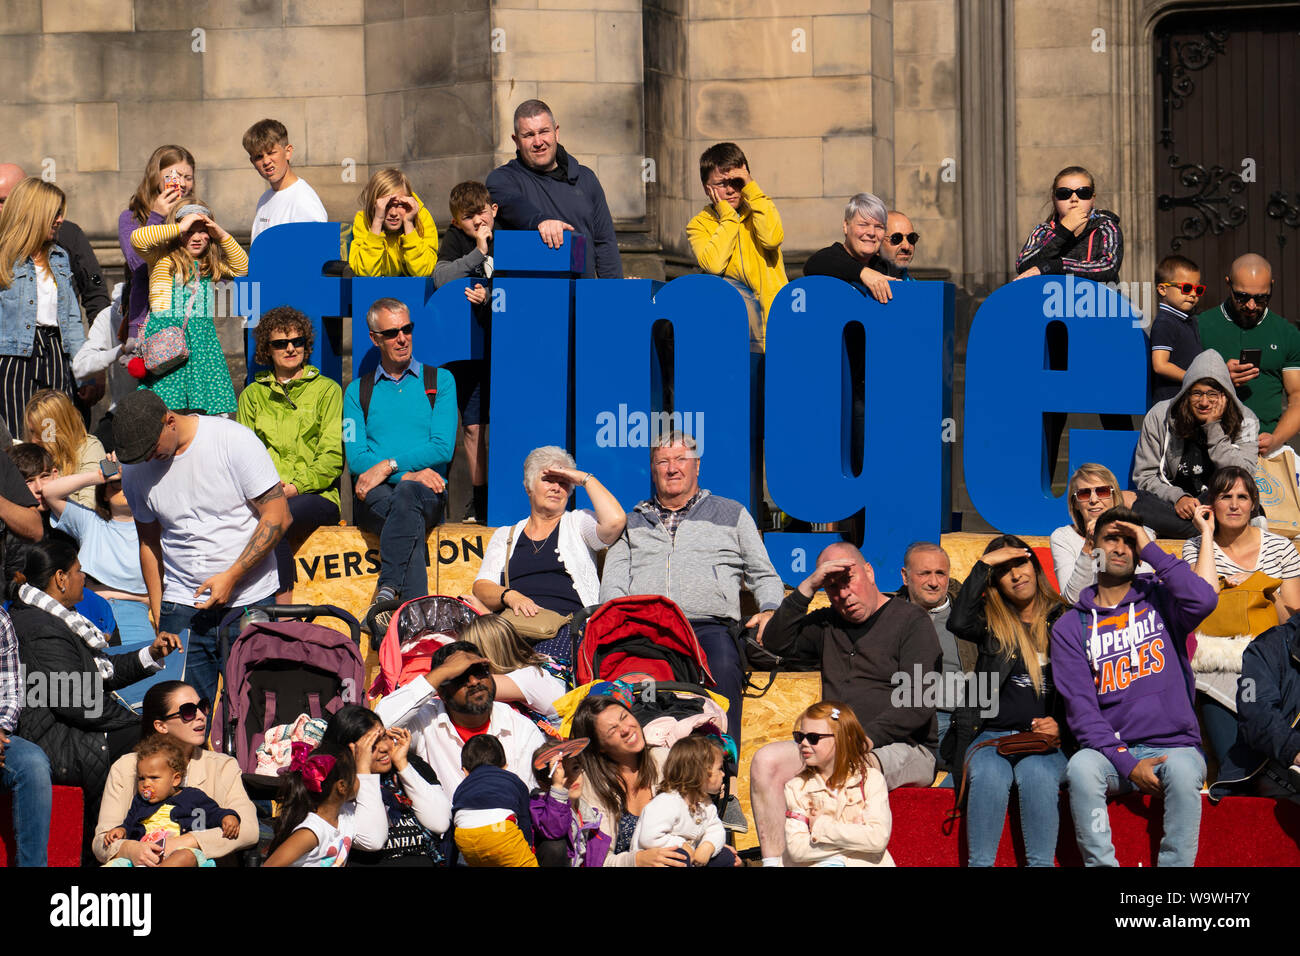 Edinburgh, Scotland, UK. 15 August 2019. Warm sunny weather in Edinburgh brought thousands of tourists onto the Royal Mile to enjoy the many street performers and actors promoting their shows during the Edinburgh Festival Fringe. Pictured. Audience watch a performer in West Parliament Square.  Iain Masterton/Alamy Live News Stock Photo